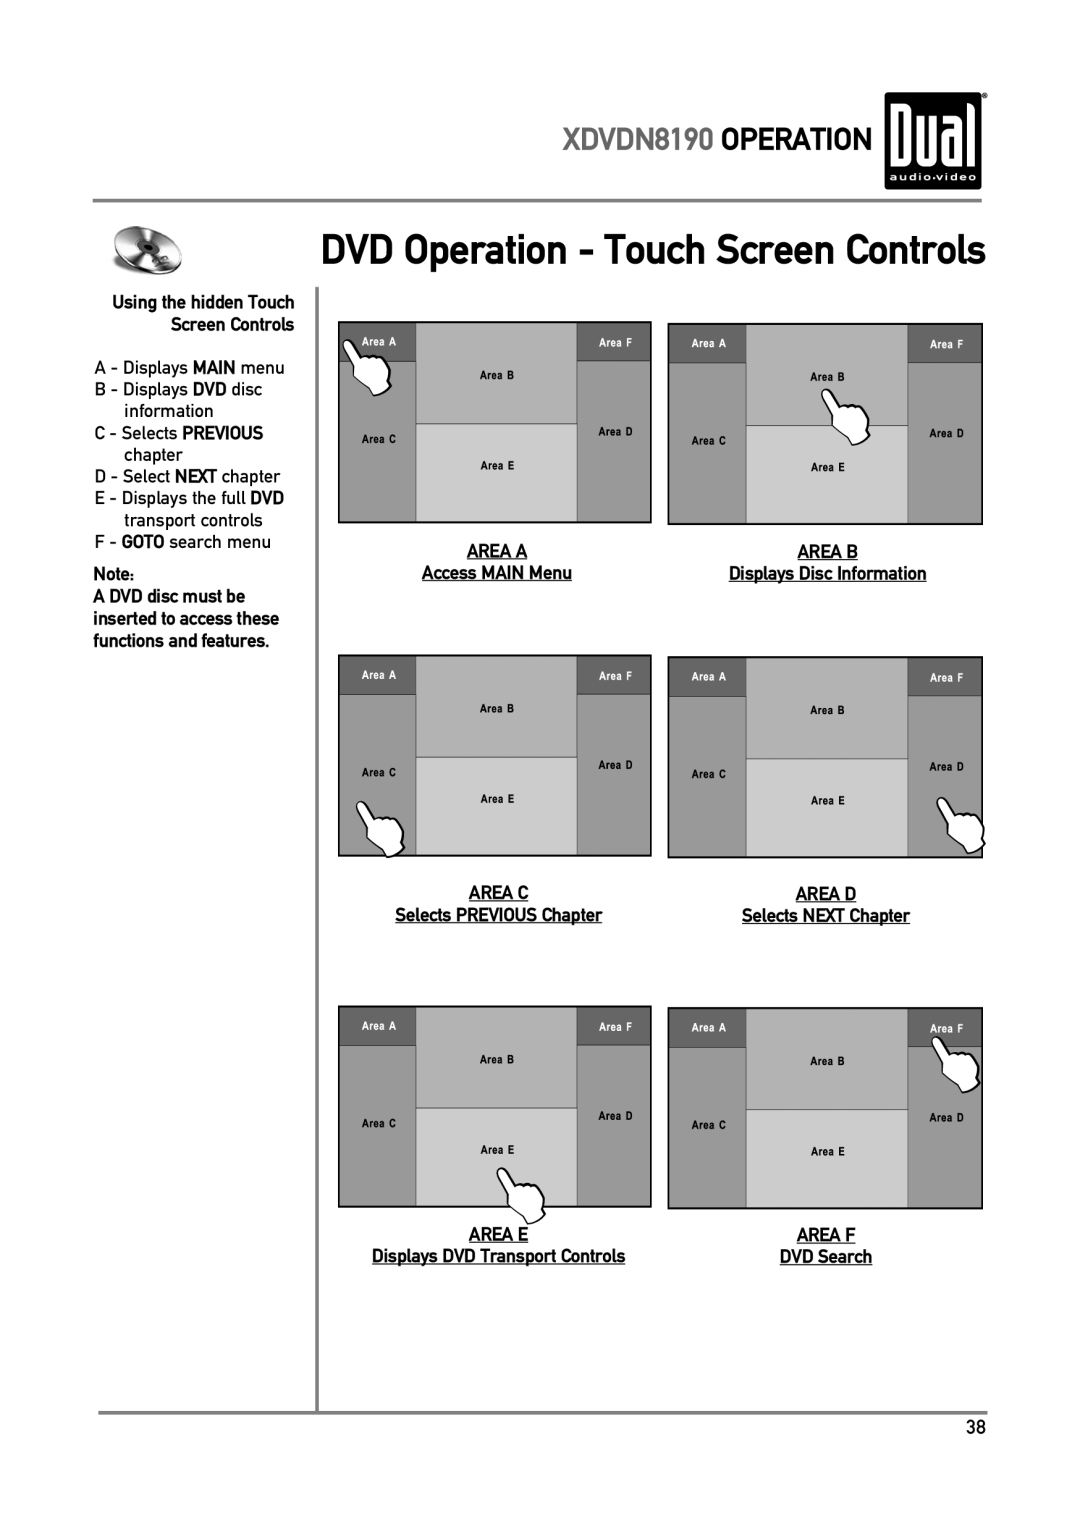 Dual DVD Operation - Touch Screen Controls, XDVDN8190 OPERATION, AREA A Access MAIN Menu, AREA F DVD Search, Area C 